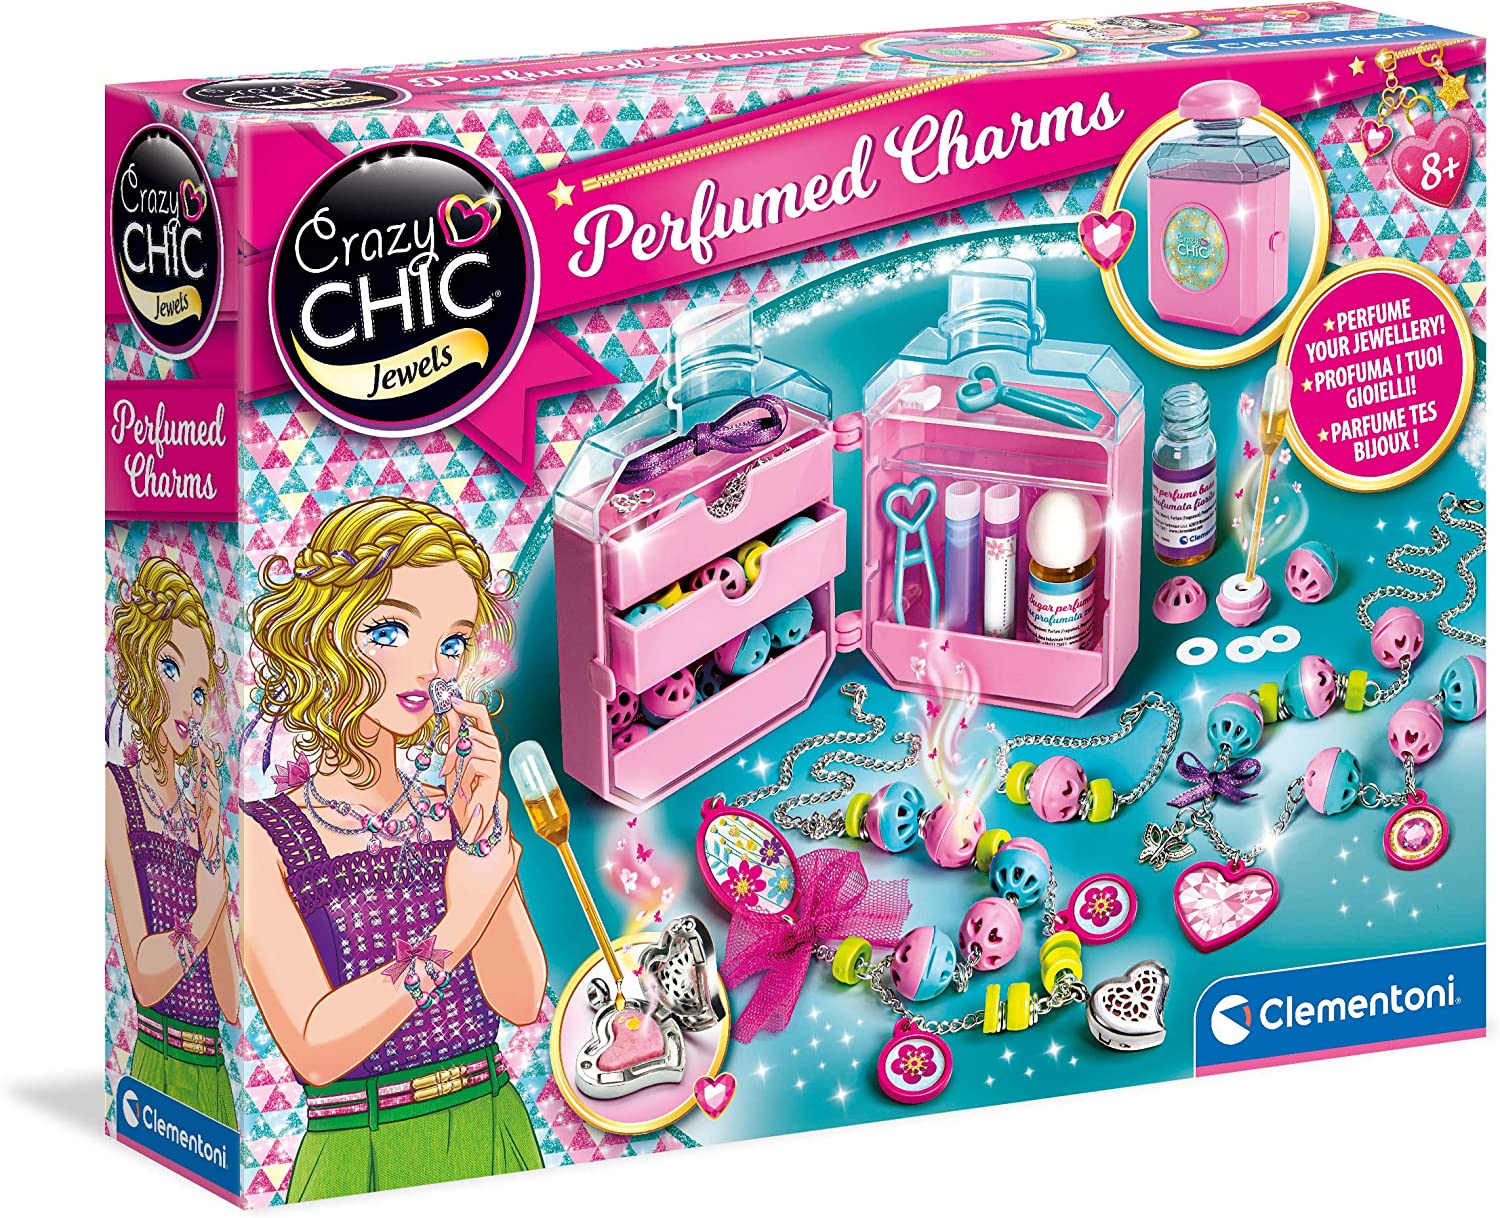 PERFUME CHARMS CRAZY CHIC 18600